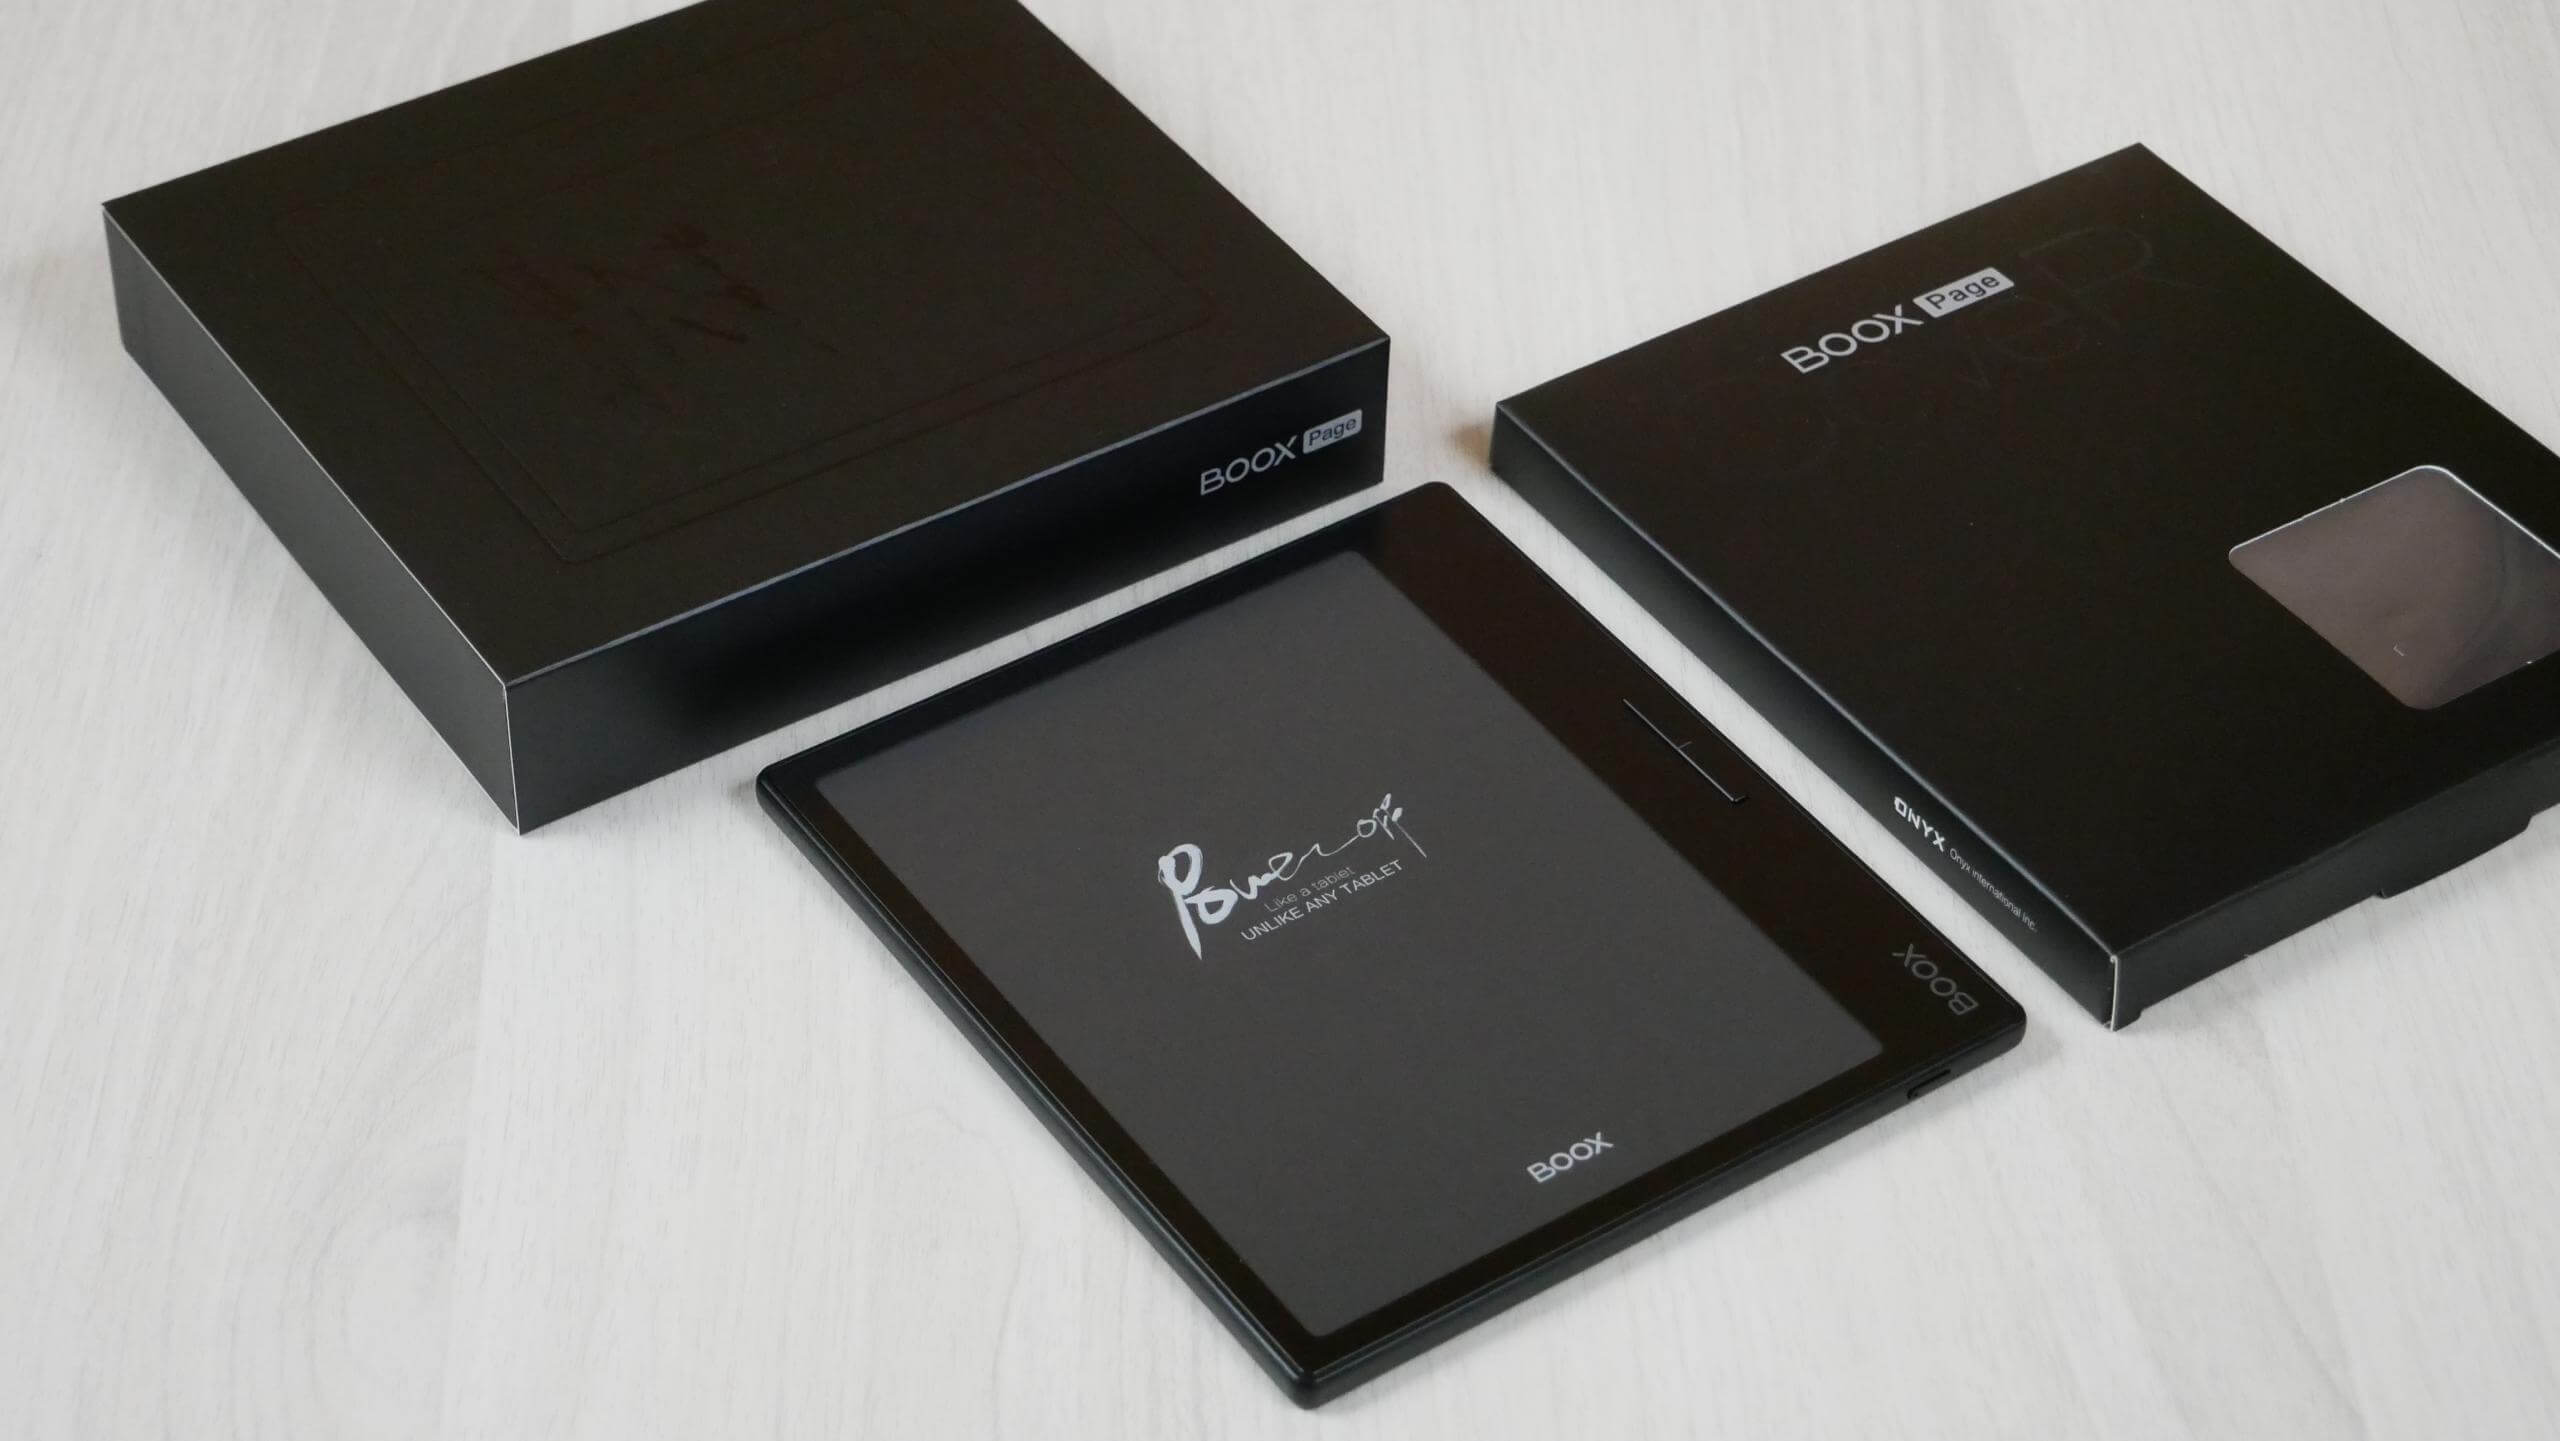 First Look at the Onyx Boox Page e-reader - Good e-Reader